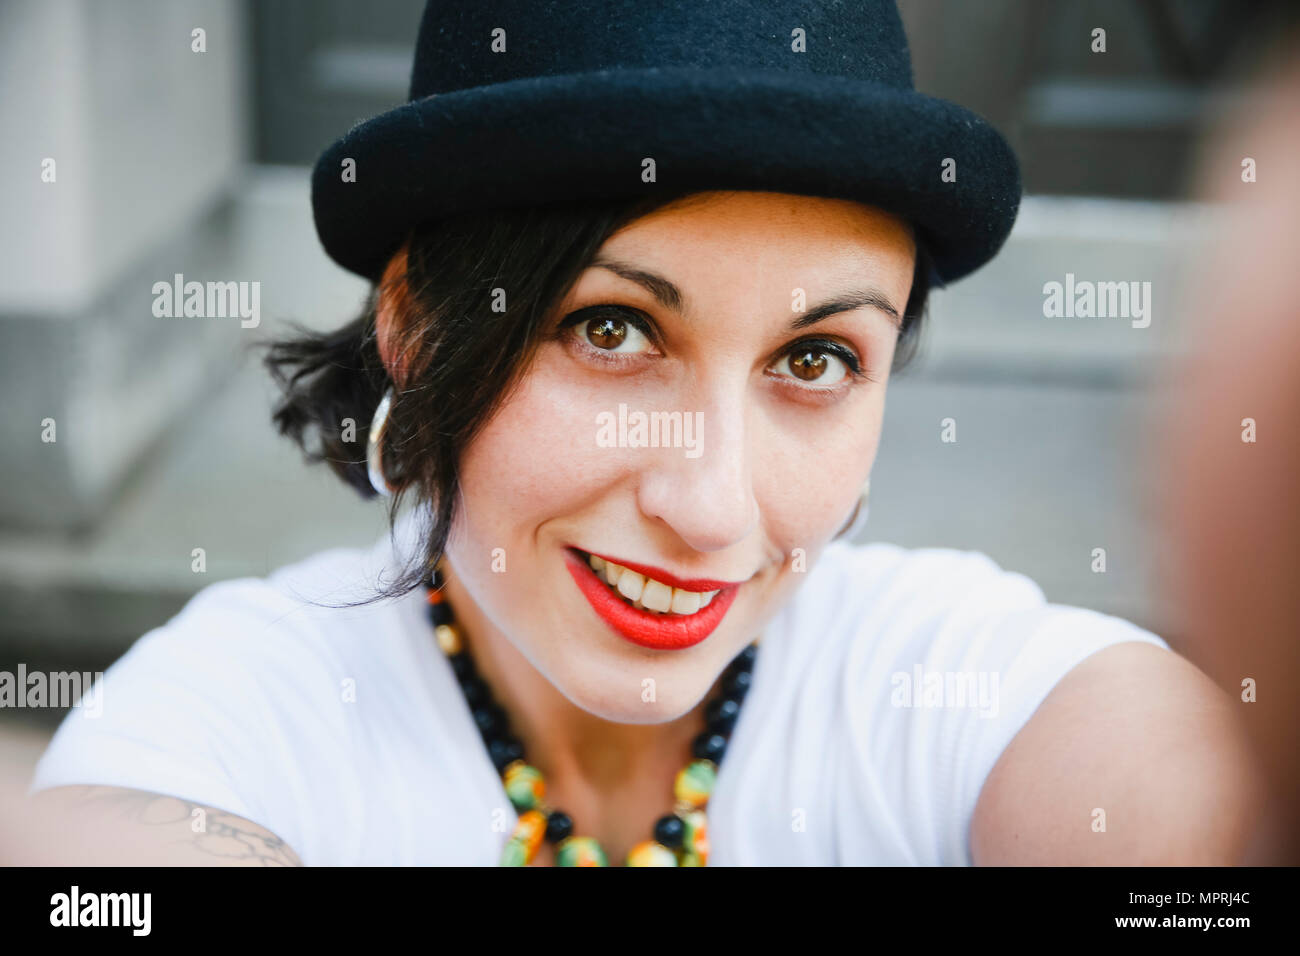 Portrait of smiling woman with hat taking selfie Stock Photo